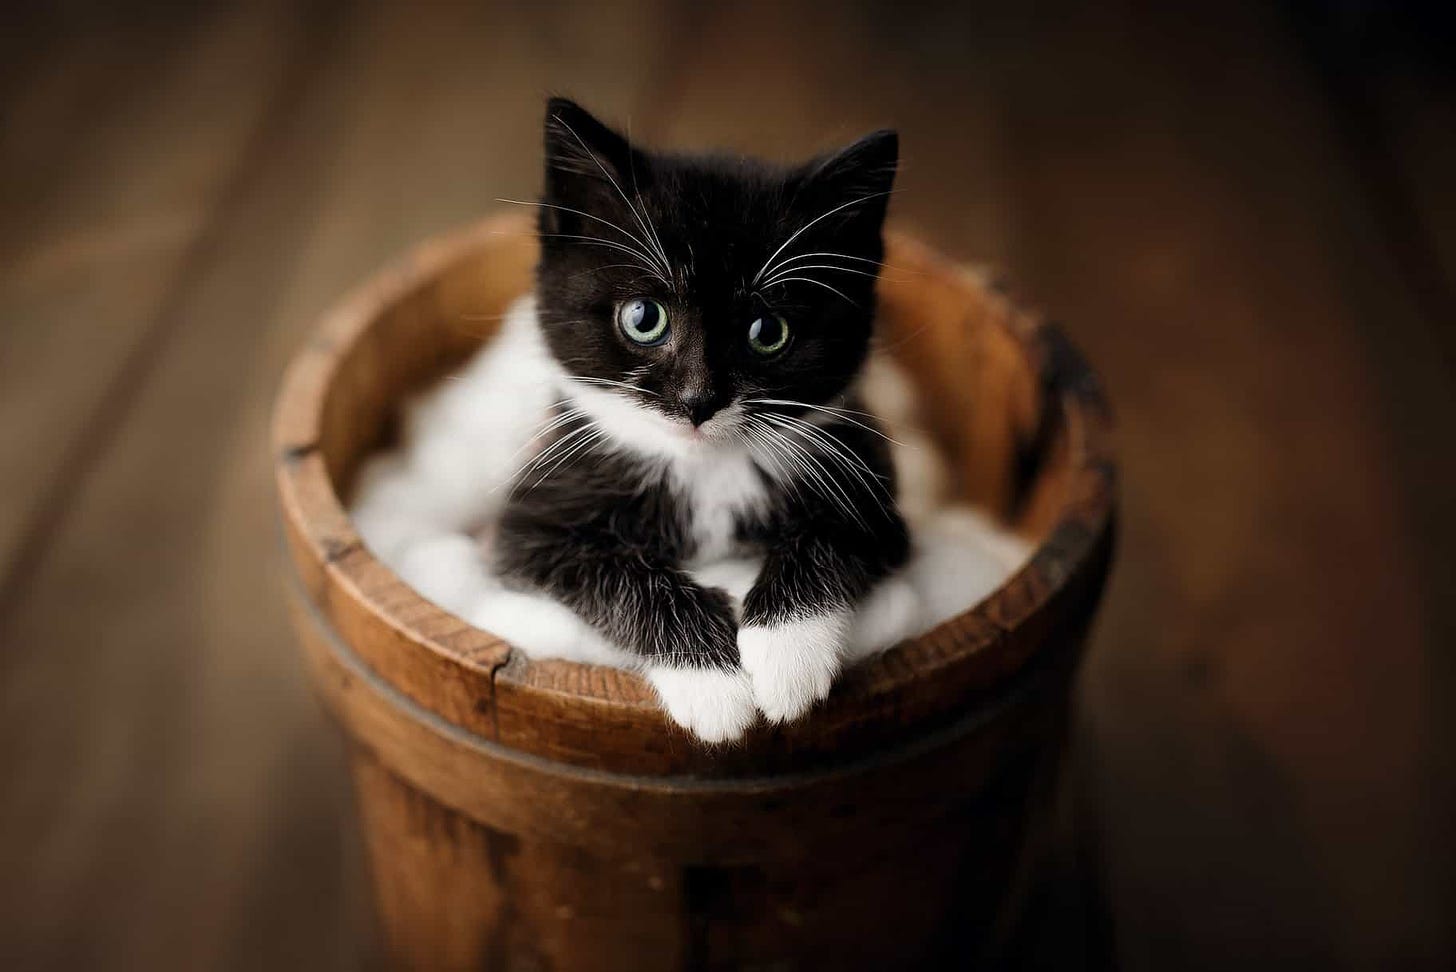 Cute Kitten Pictures - The 14 Prettiest Baby Cats Of All Time!